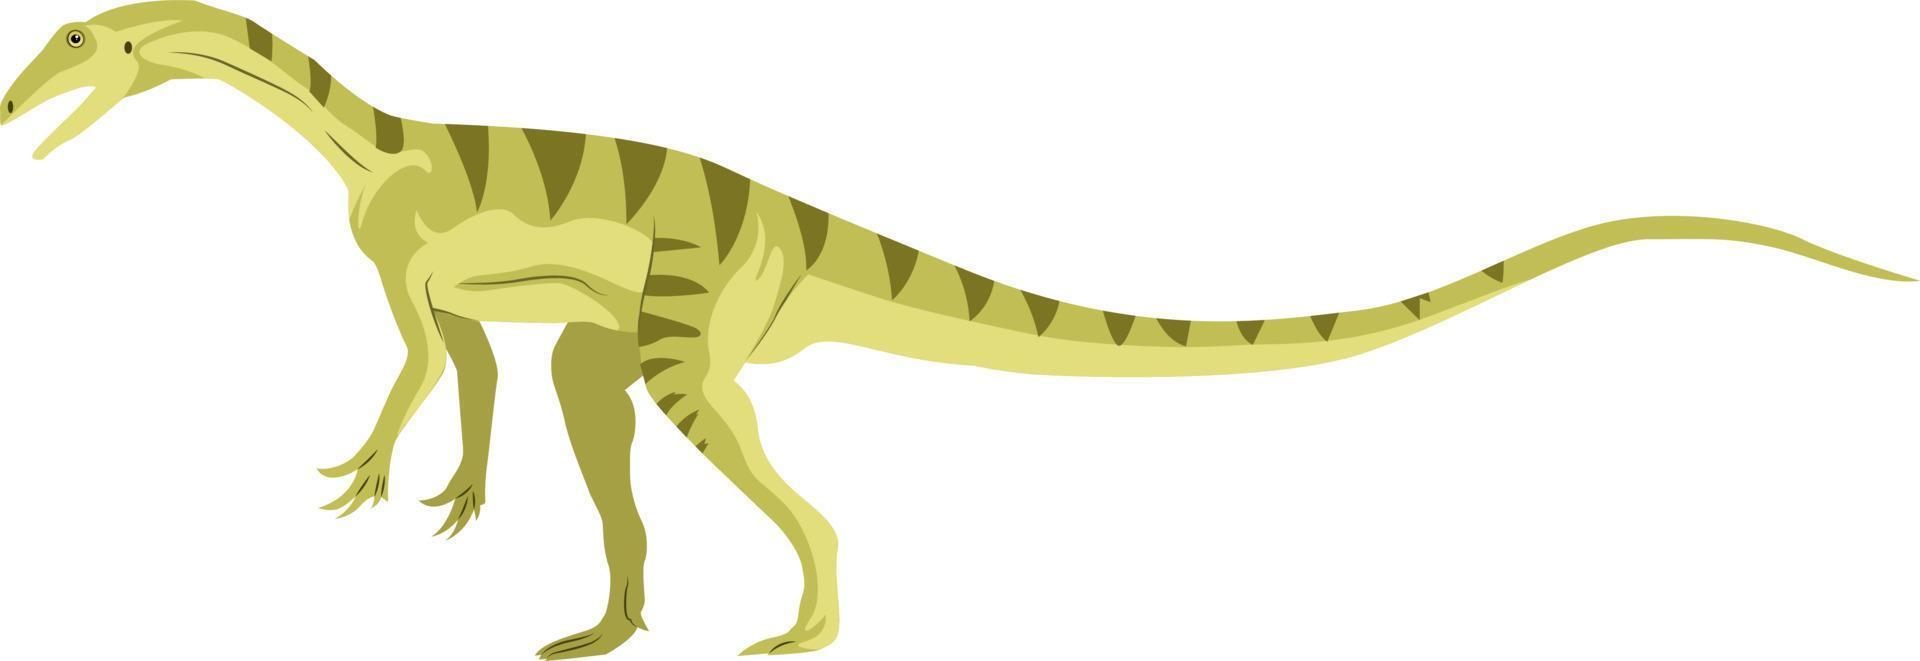 Green small dinosour, illustration, vector on white background.